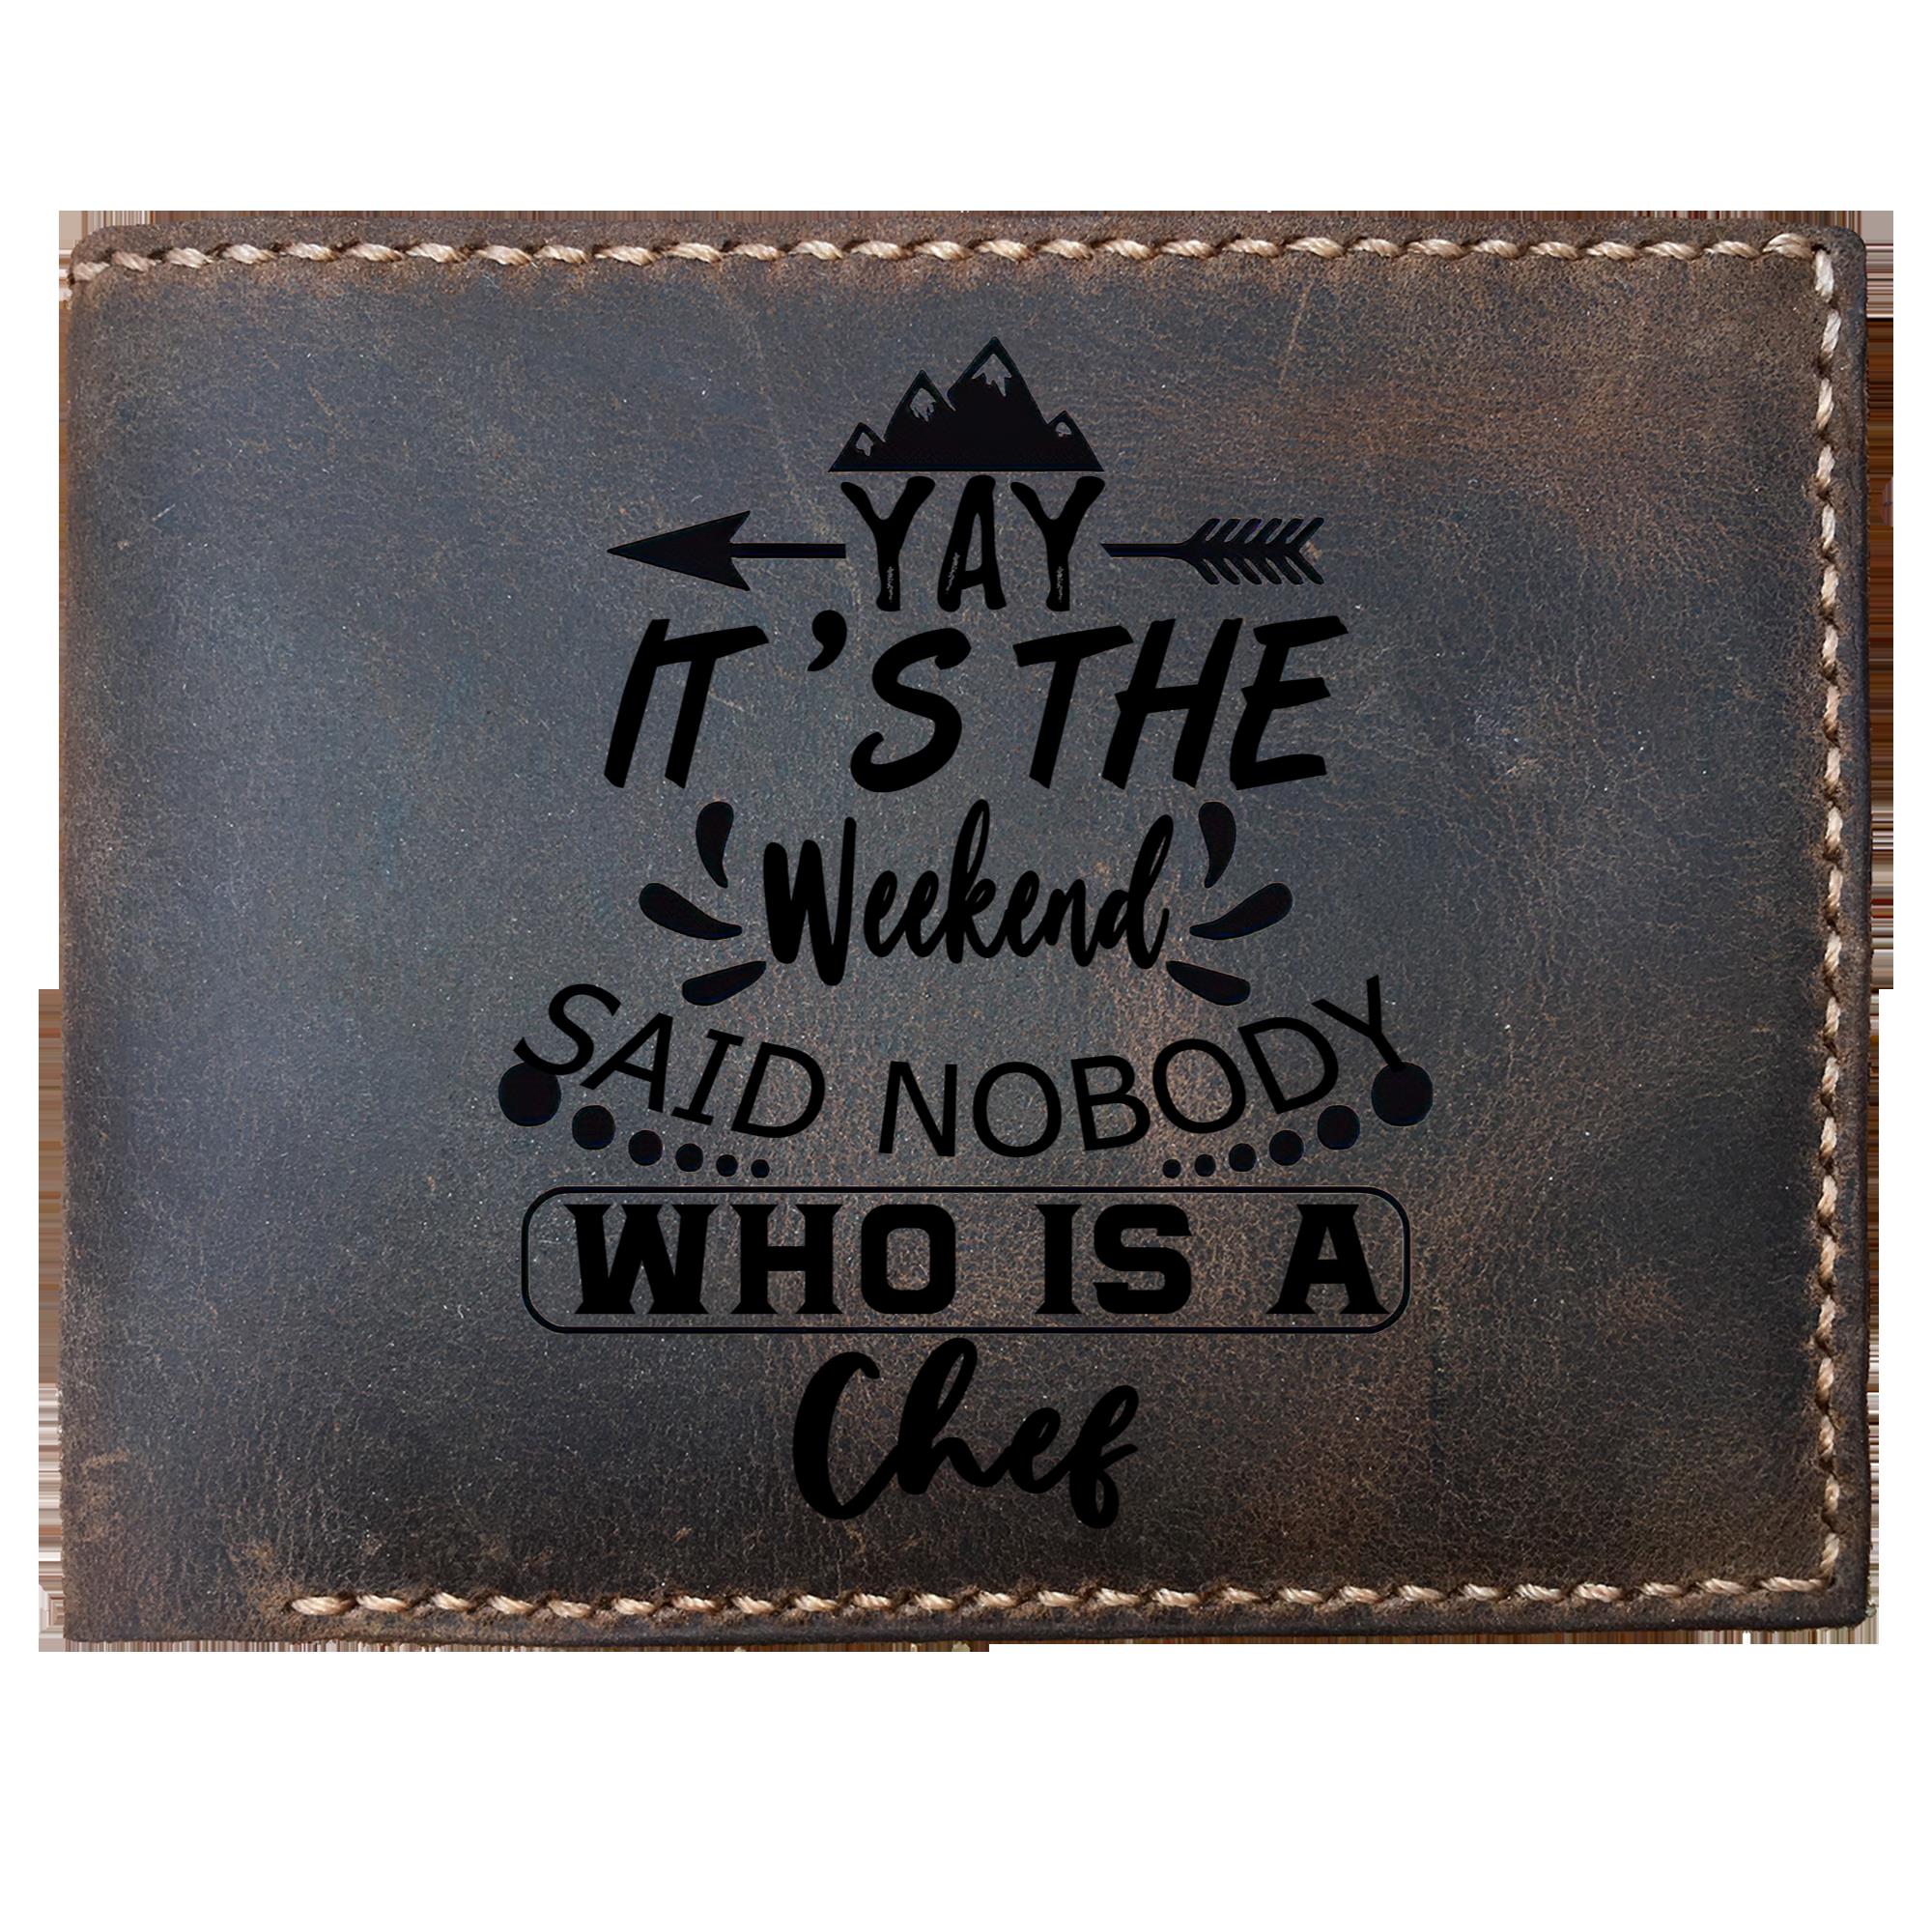 Skitongifts Funny Custom Laser Engraved Bifold Leather Wallet For Men, It's The Weekend Said Nobody Who Is A Chef, Father's Day Gifts